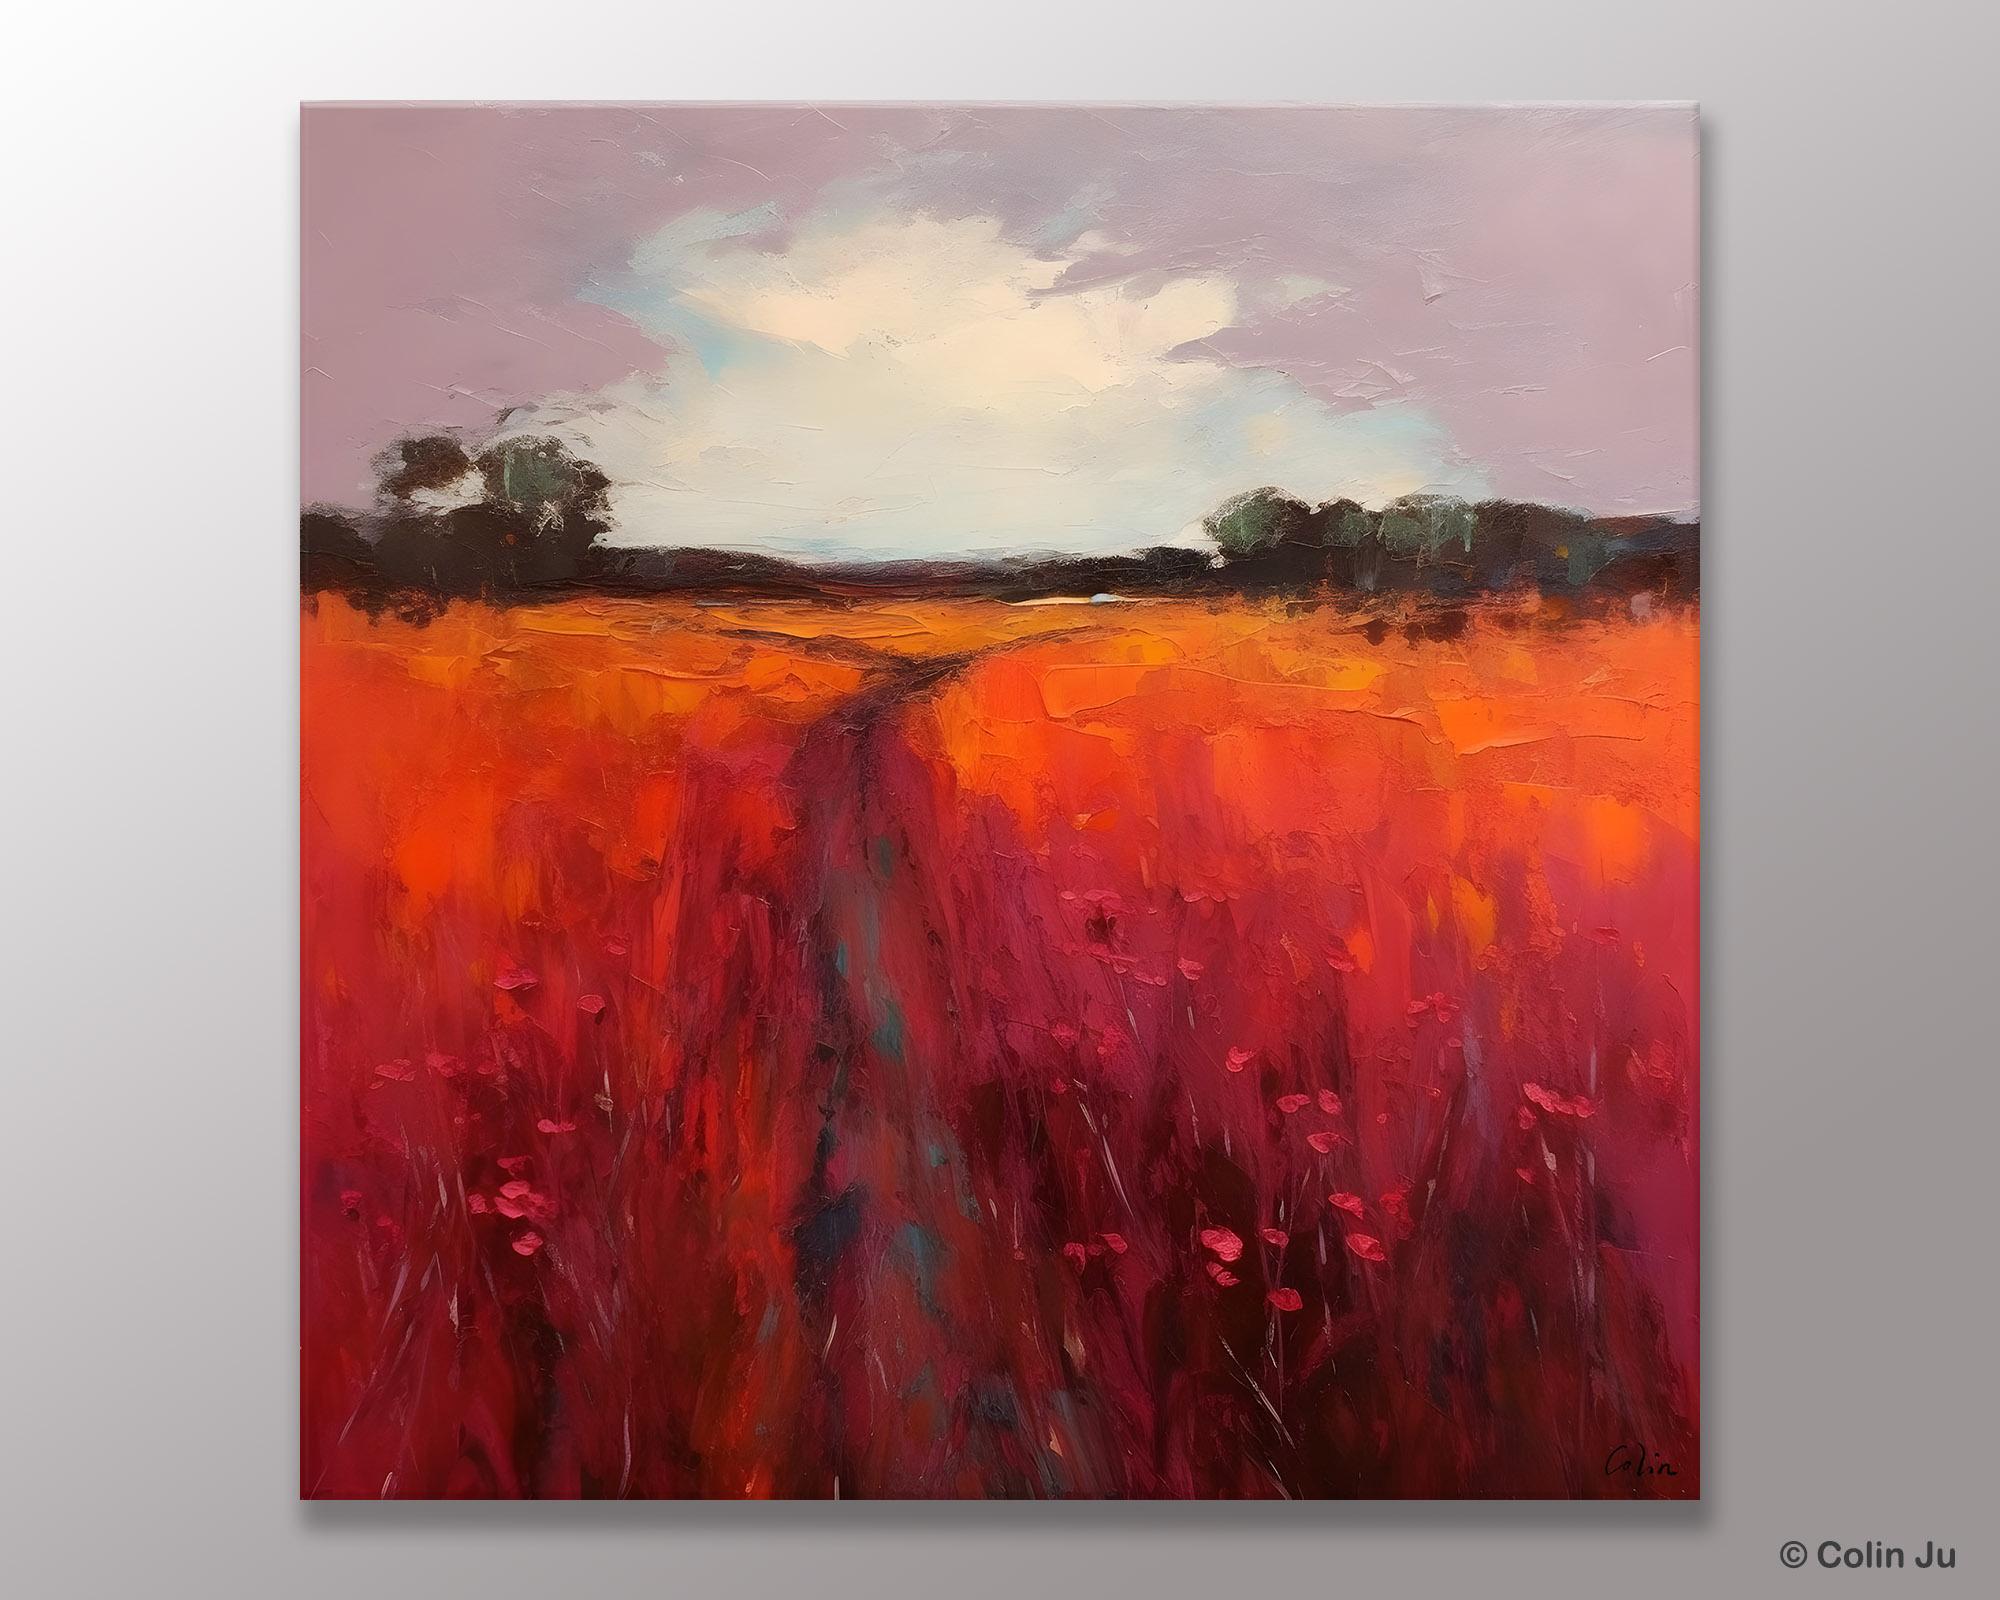 Landscape Canvas Paintings, Acrylic Abstract Art on Canvas, Red Poppy Flower Field Painting, Landscape Acrylic Painting, Living Room Wall Art Paintings-ArtWorkCrafts.com